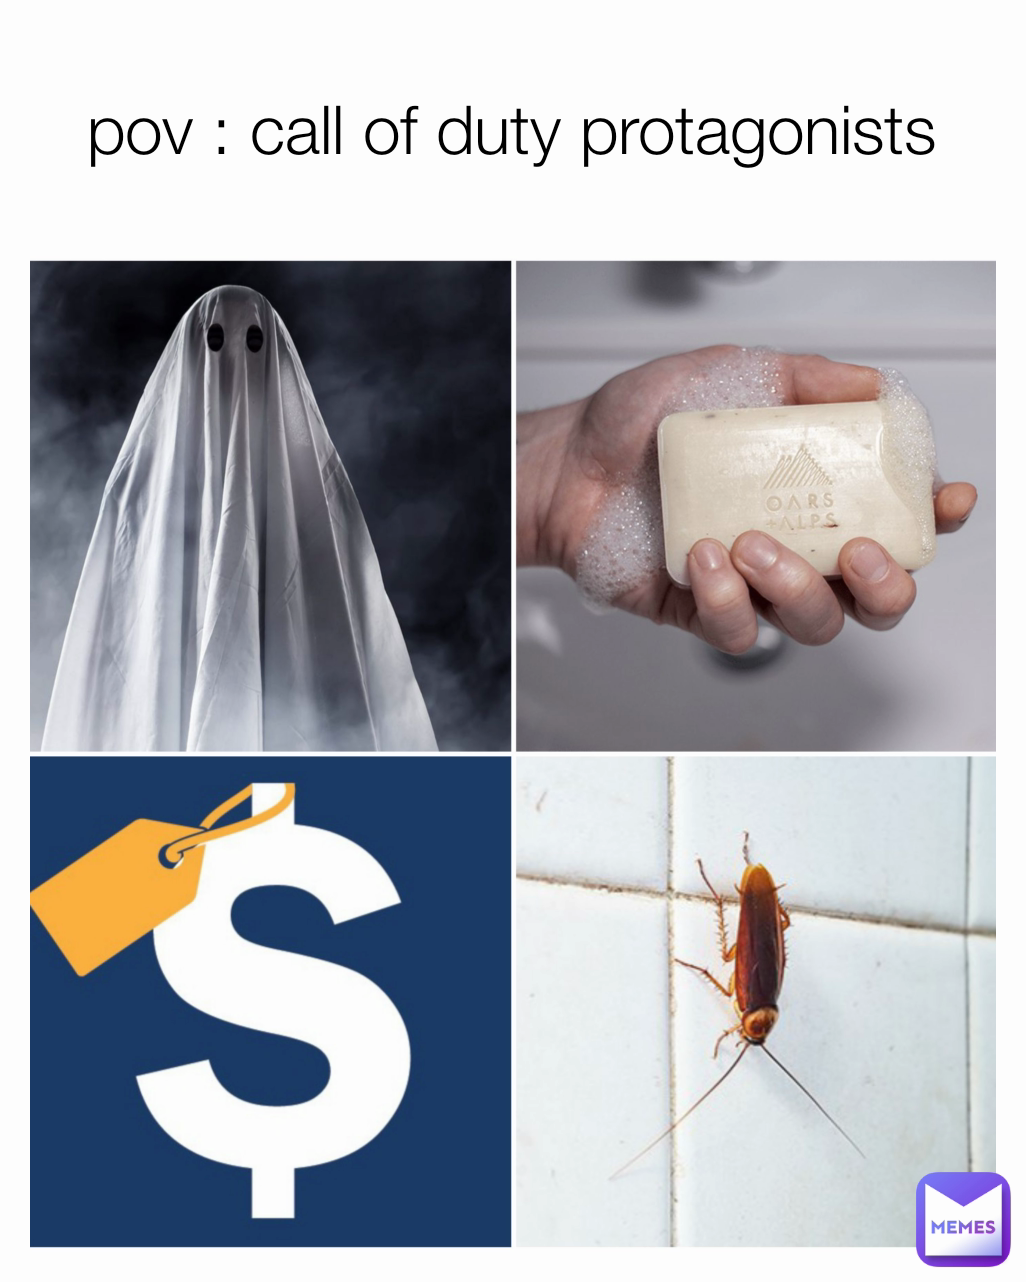 pov : call of duty protagonists